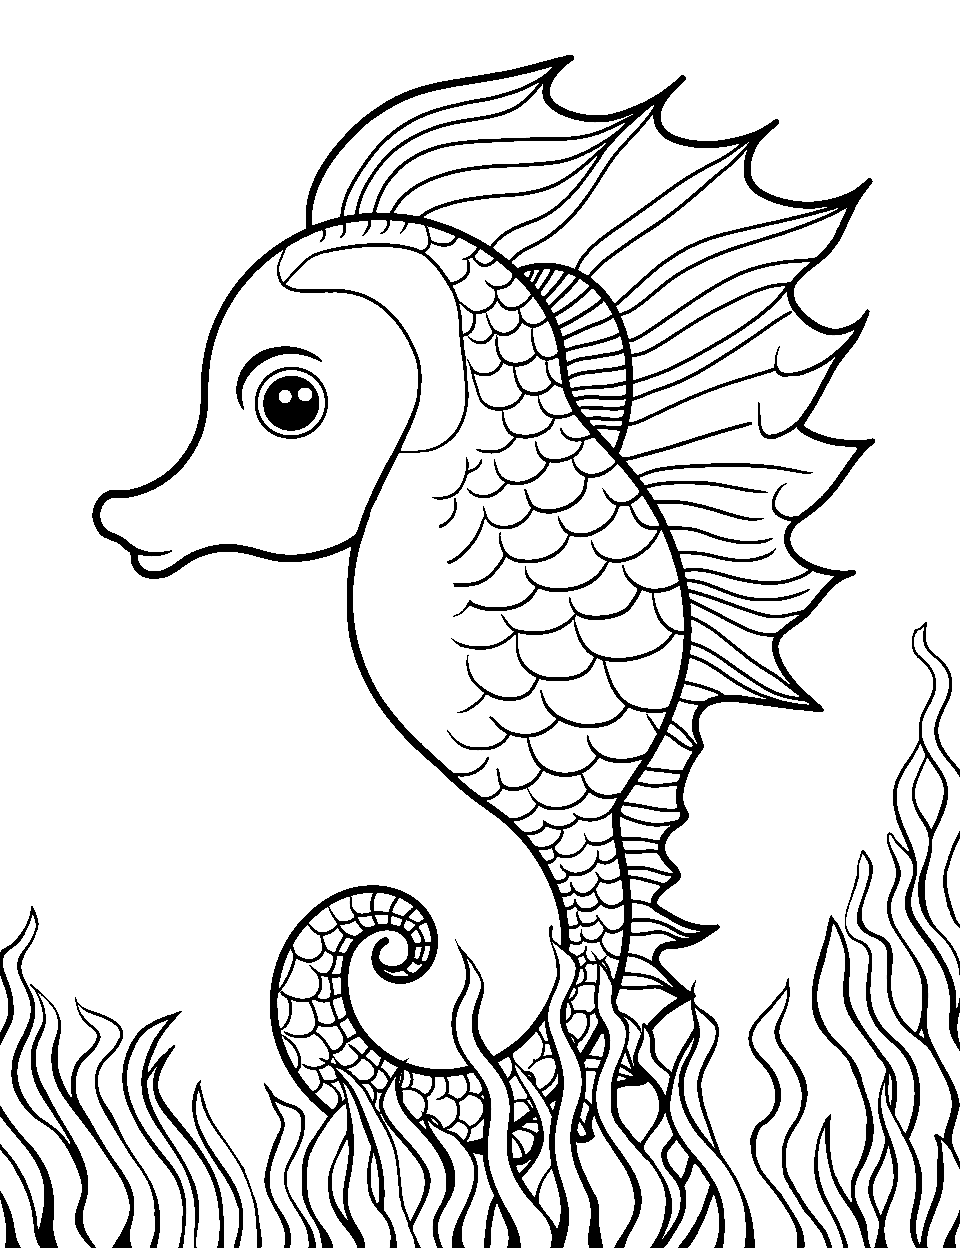 Seahorse in Seaweed Maze Ocean Coloring Page - A single seahorse navigating through a patch of seaweed.